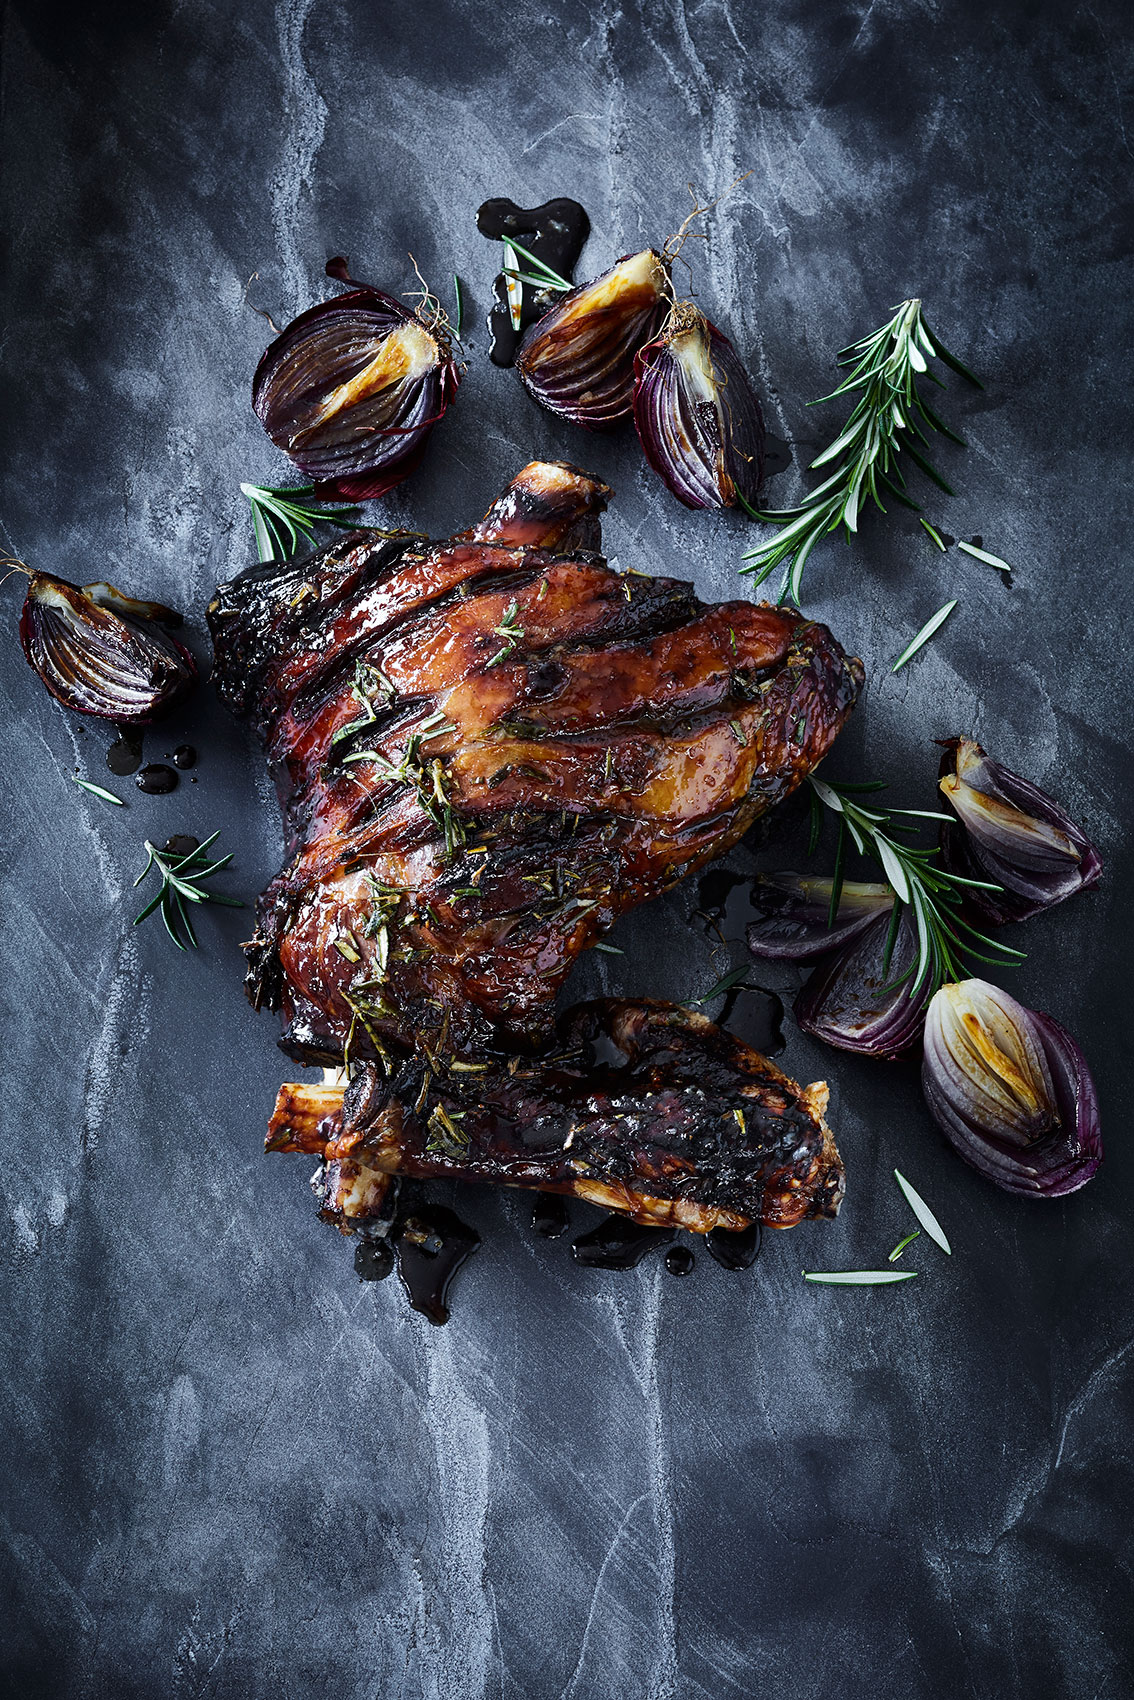 Slow Cooked • Honey Lamb Leg with Rosemary on Dark Stone Bench • Cookbook & Editorial Food Photography